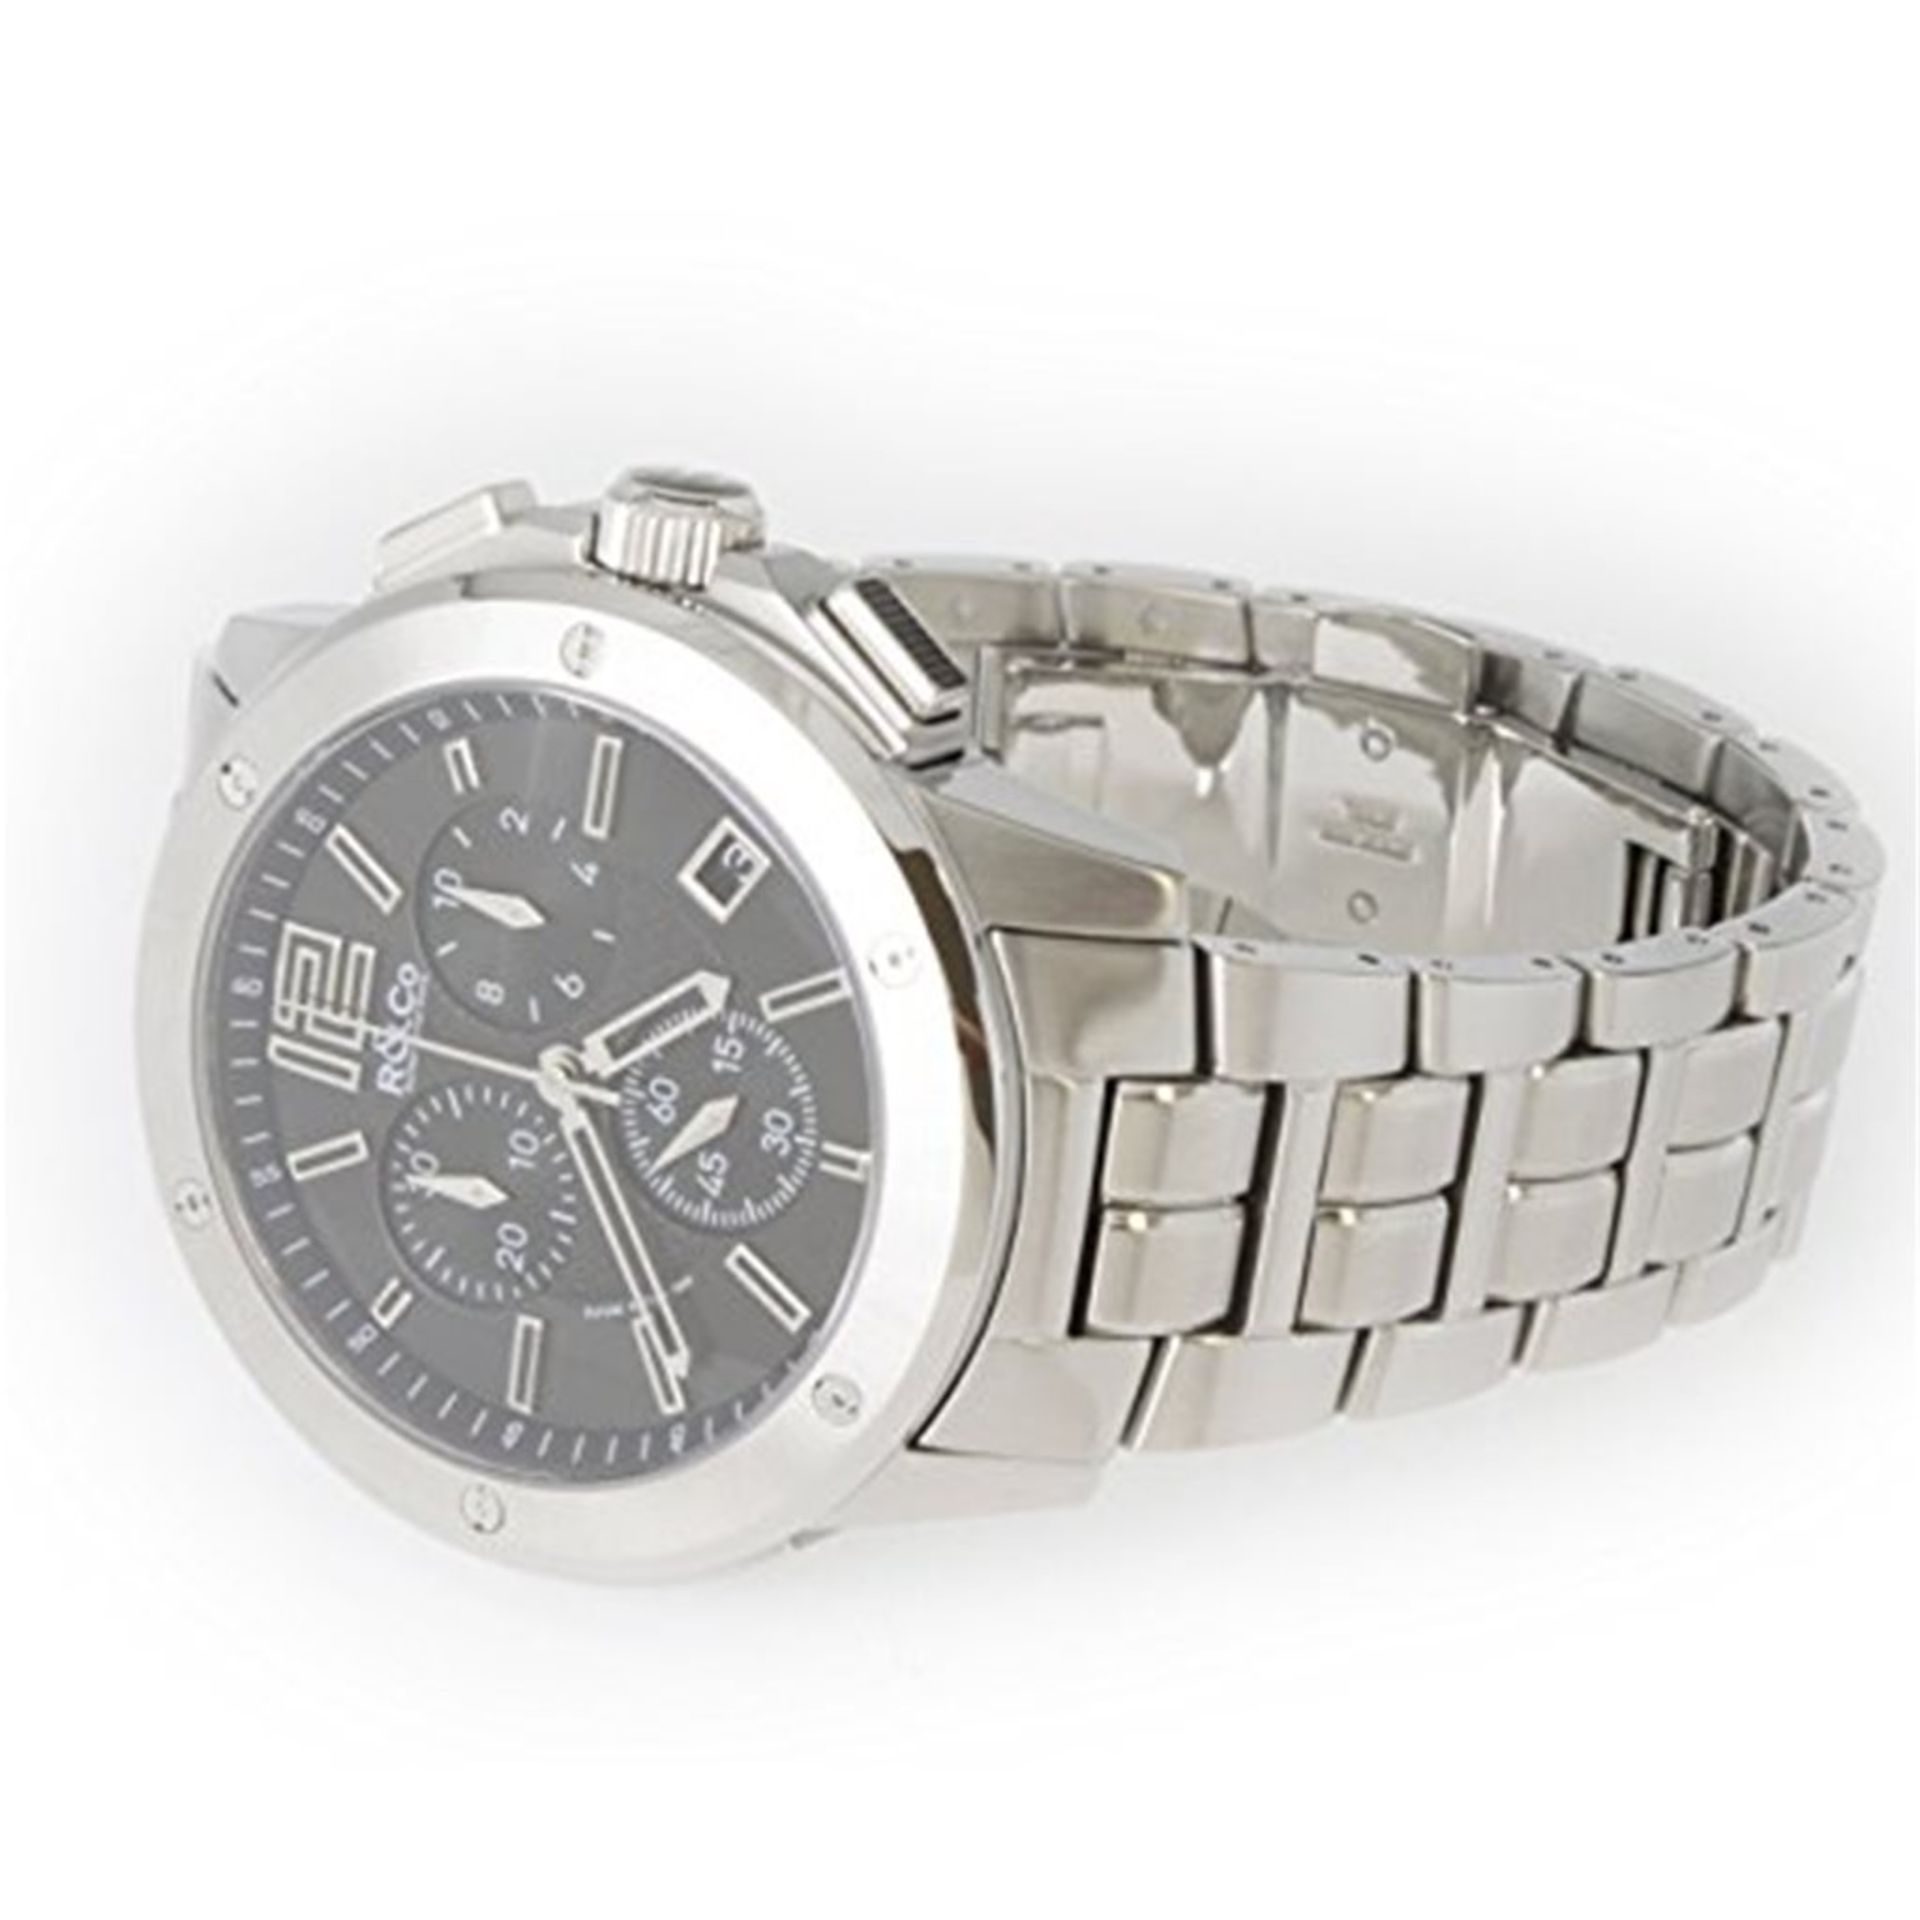 R&Co Men's Quartz Watch with Black Dial Chronograph Display and Silver Stainless Steel Bracelet RGB0 - Image 2 of 4